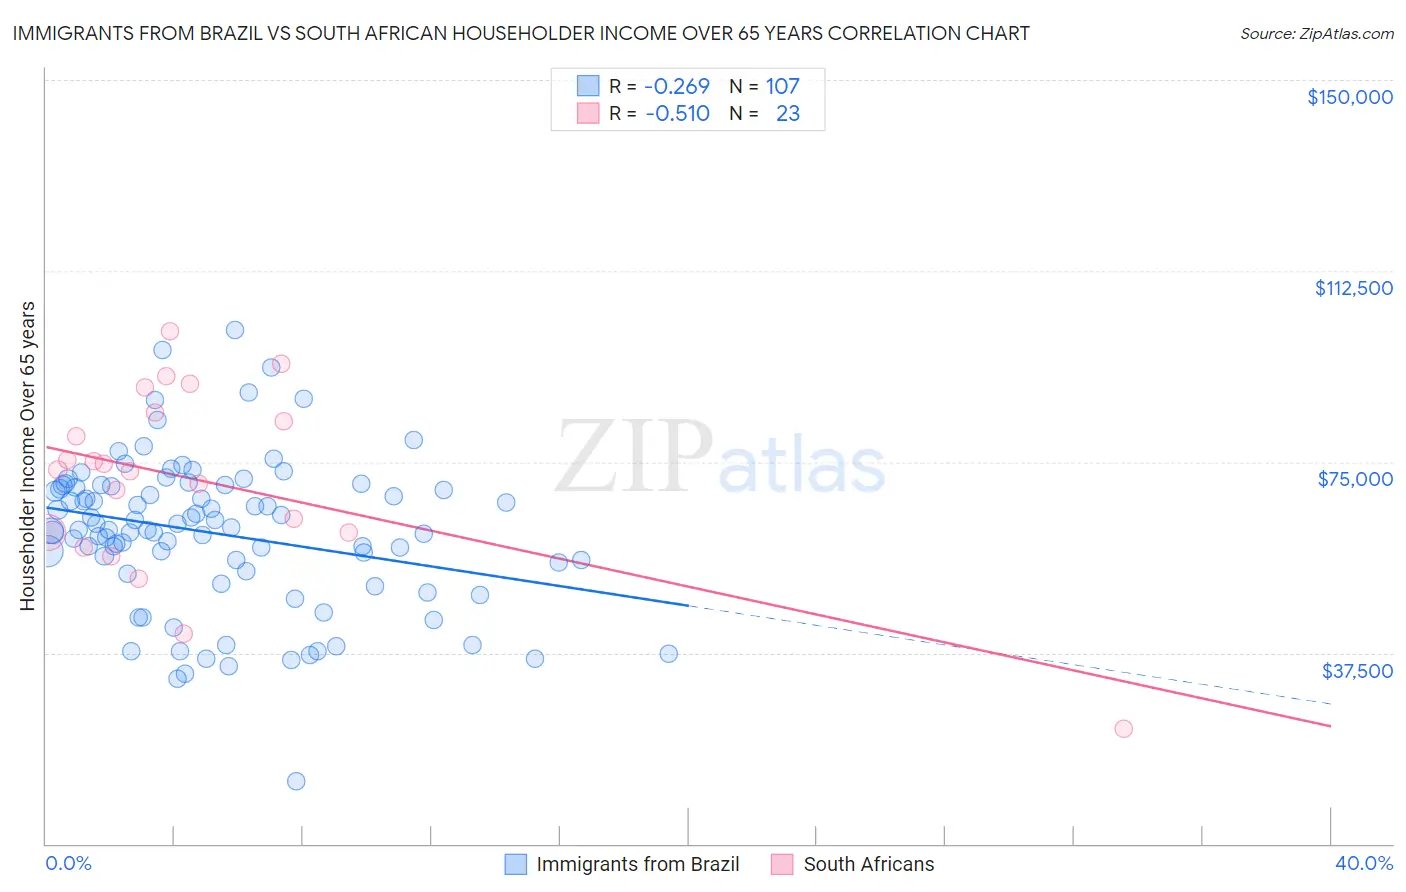 Immigrants from Brazil vs South African Householder Income Over 65 years